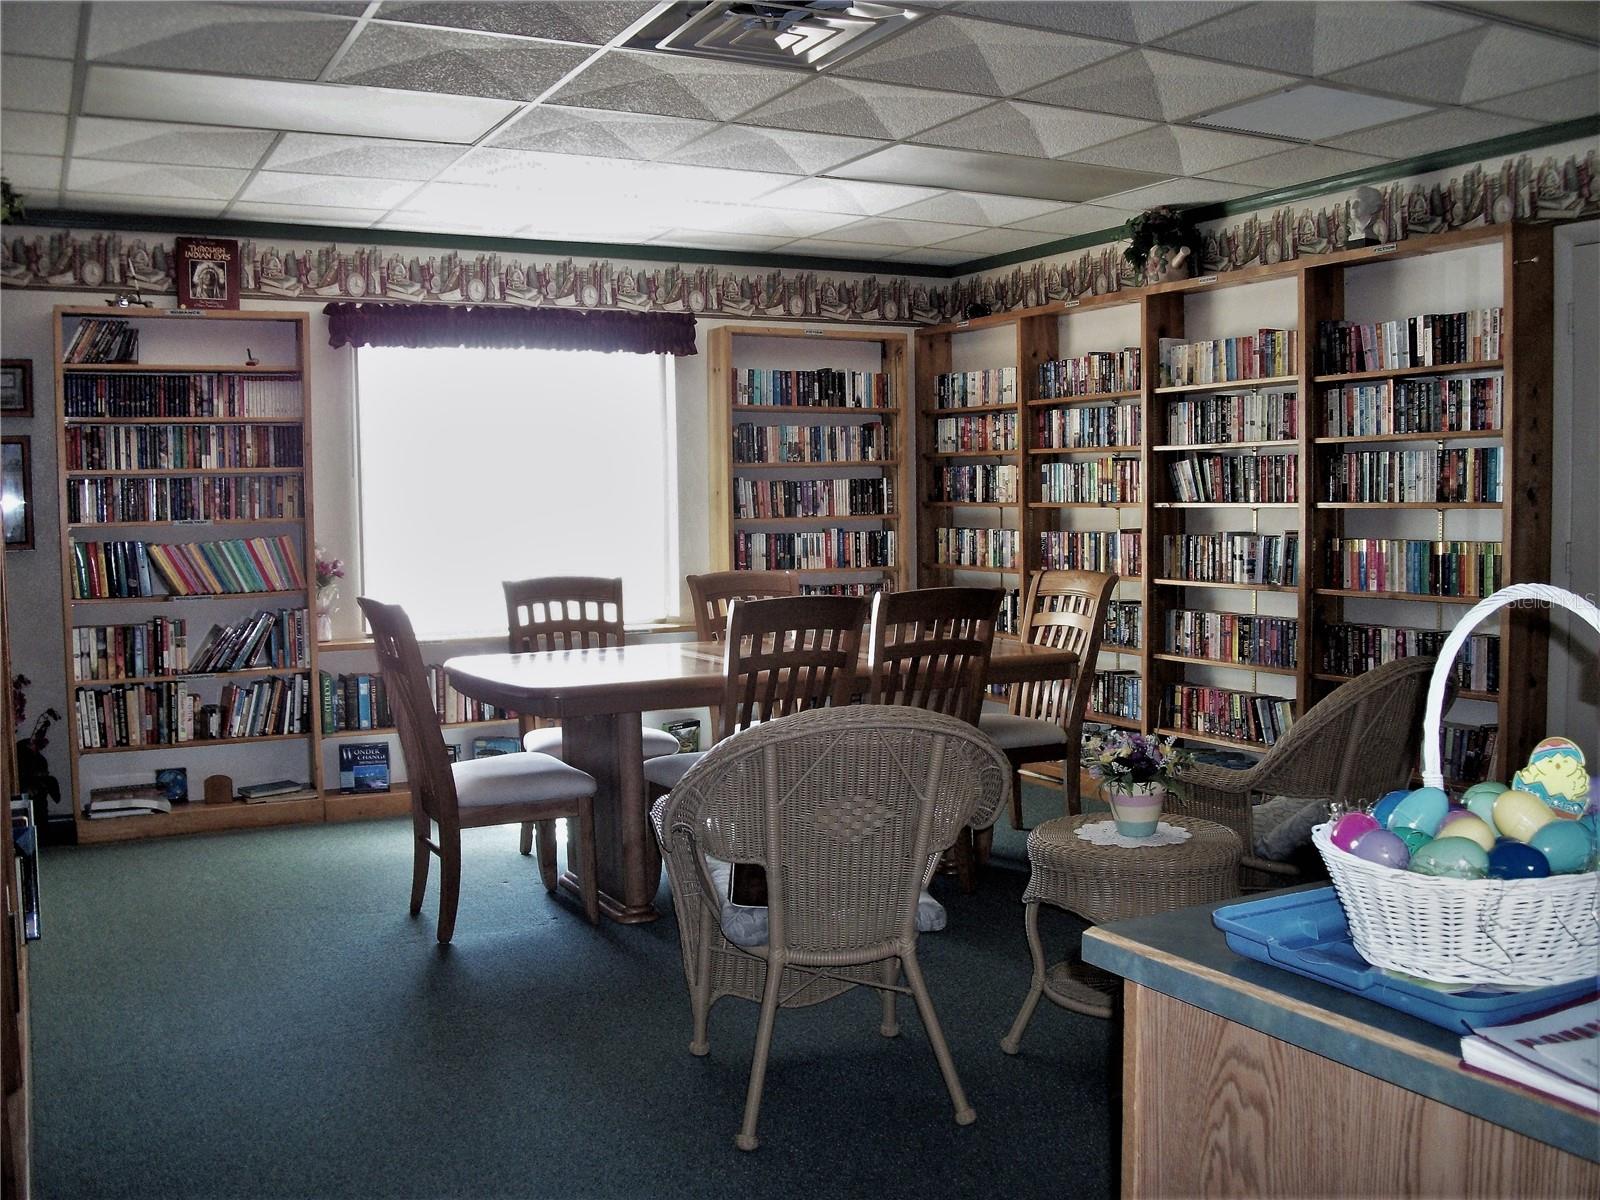 Residents are welcome to borrow or donate books, DVD or puzzles to the community library.